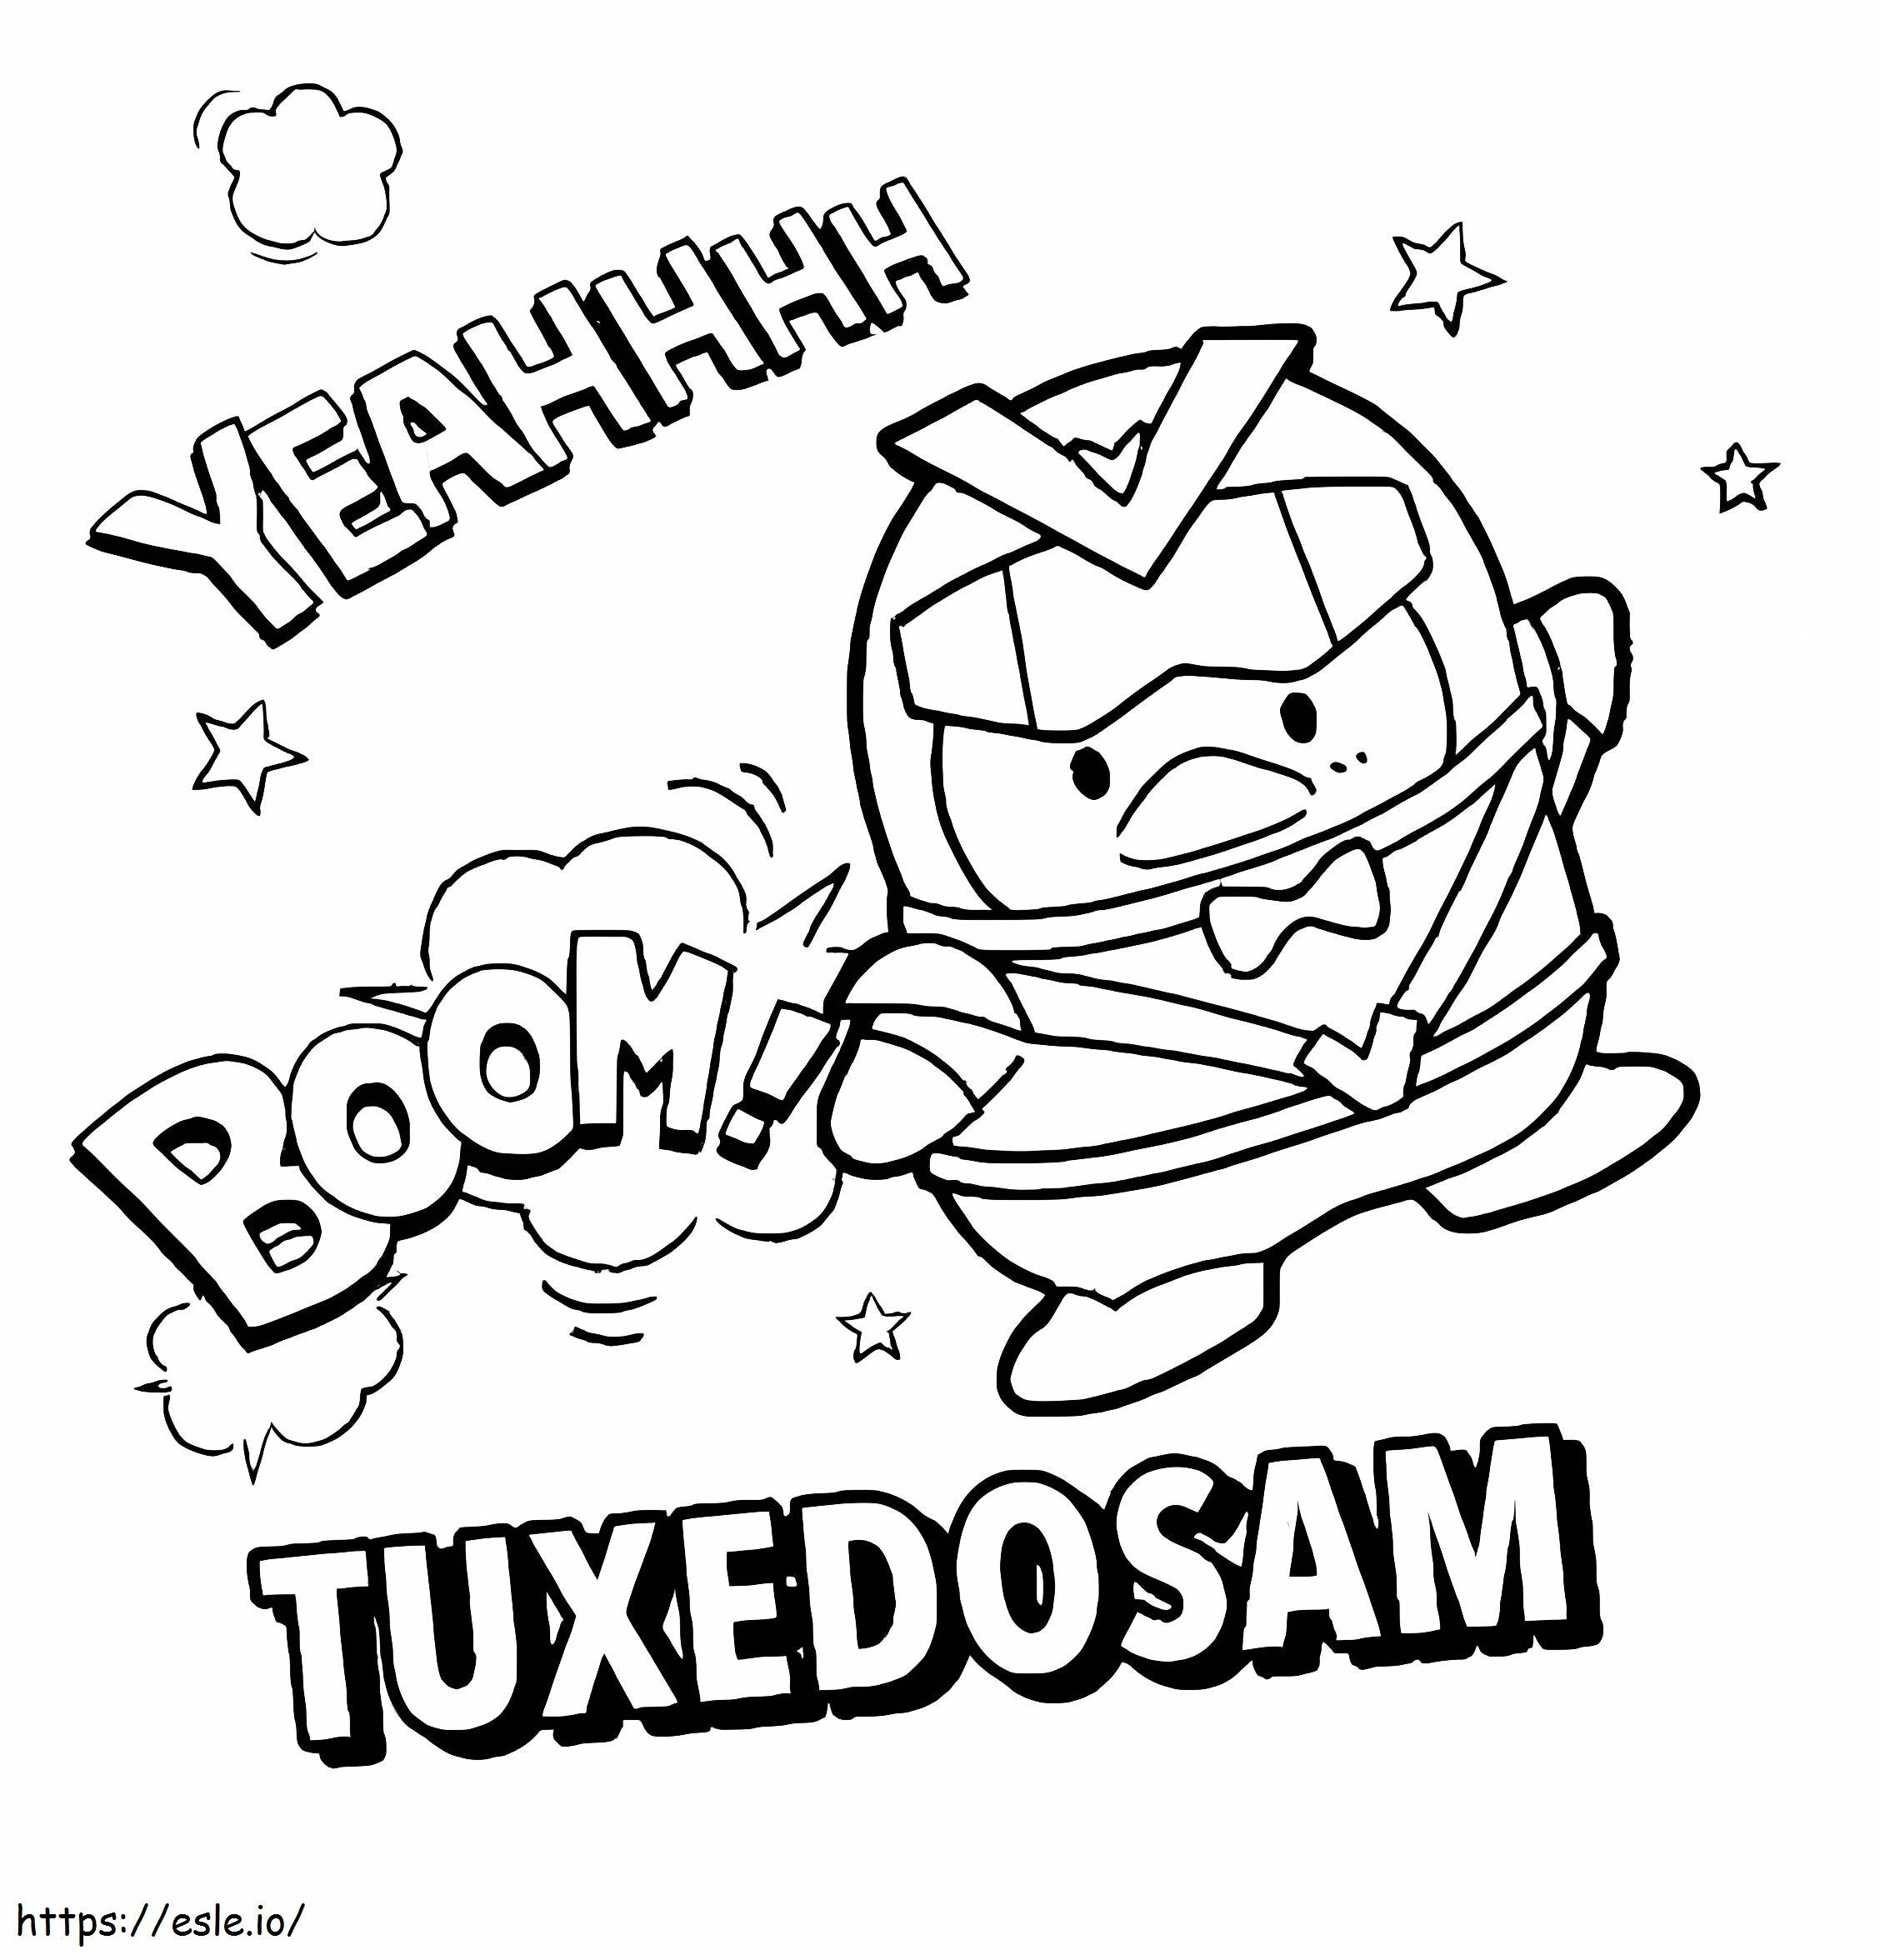 Cool Tuxedo Sam coloring page